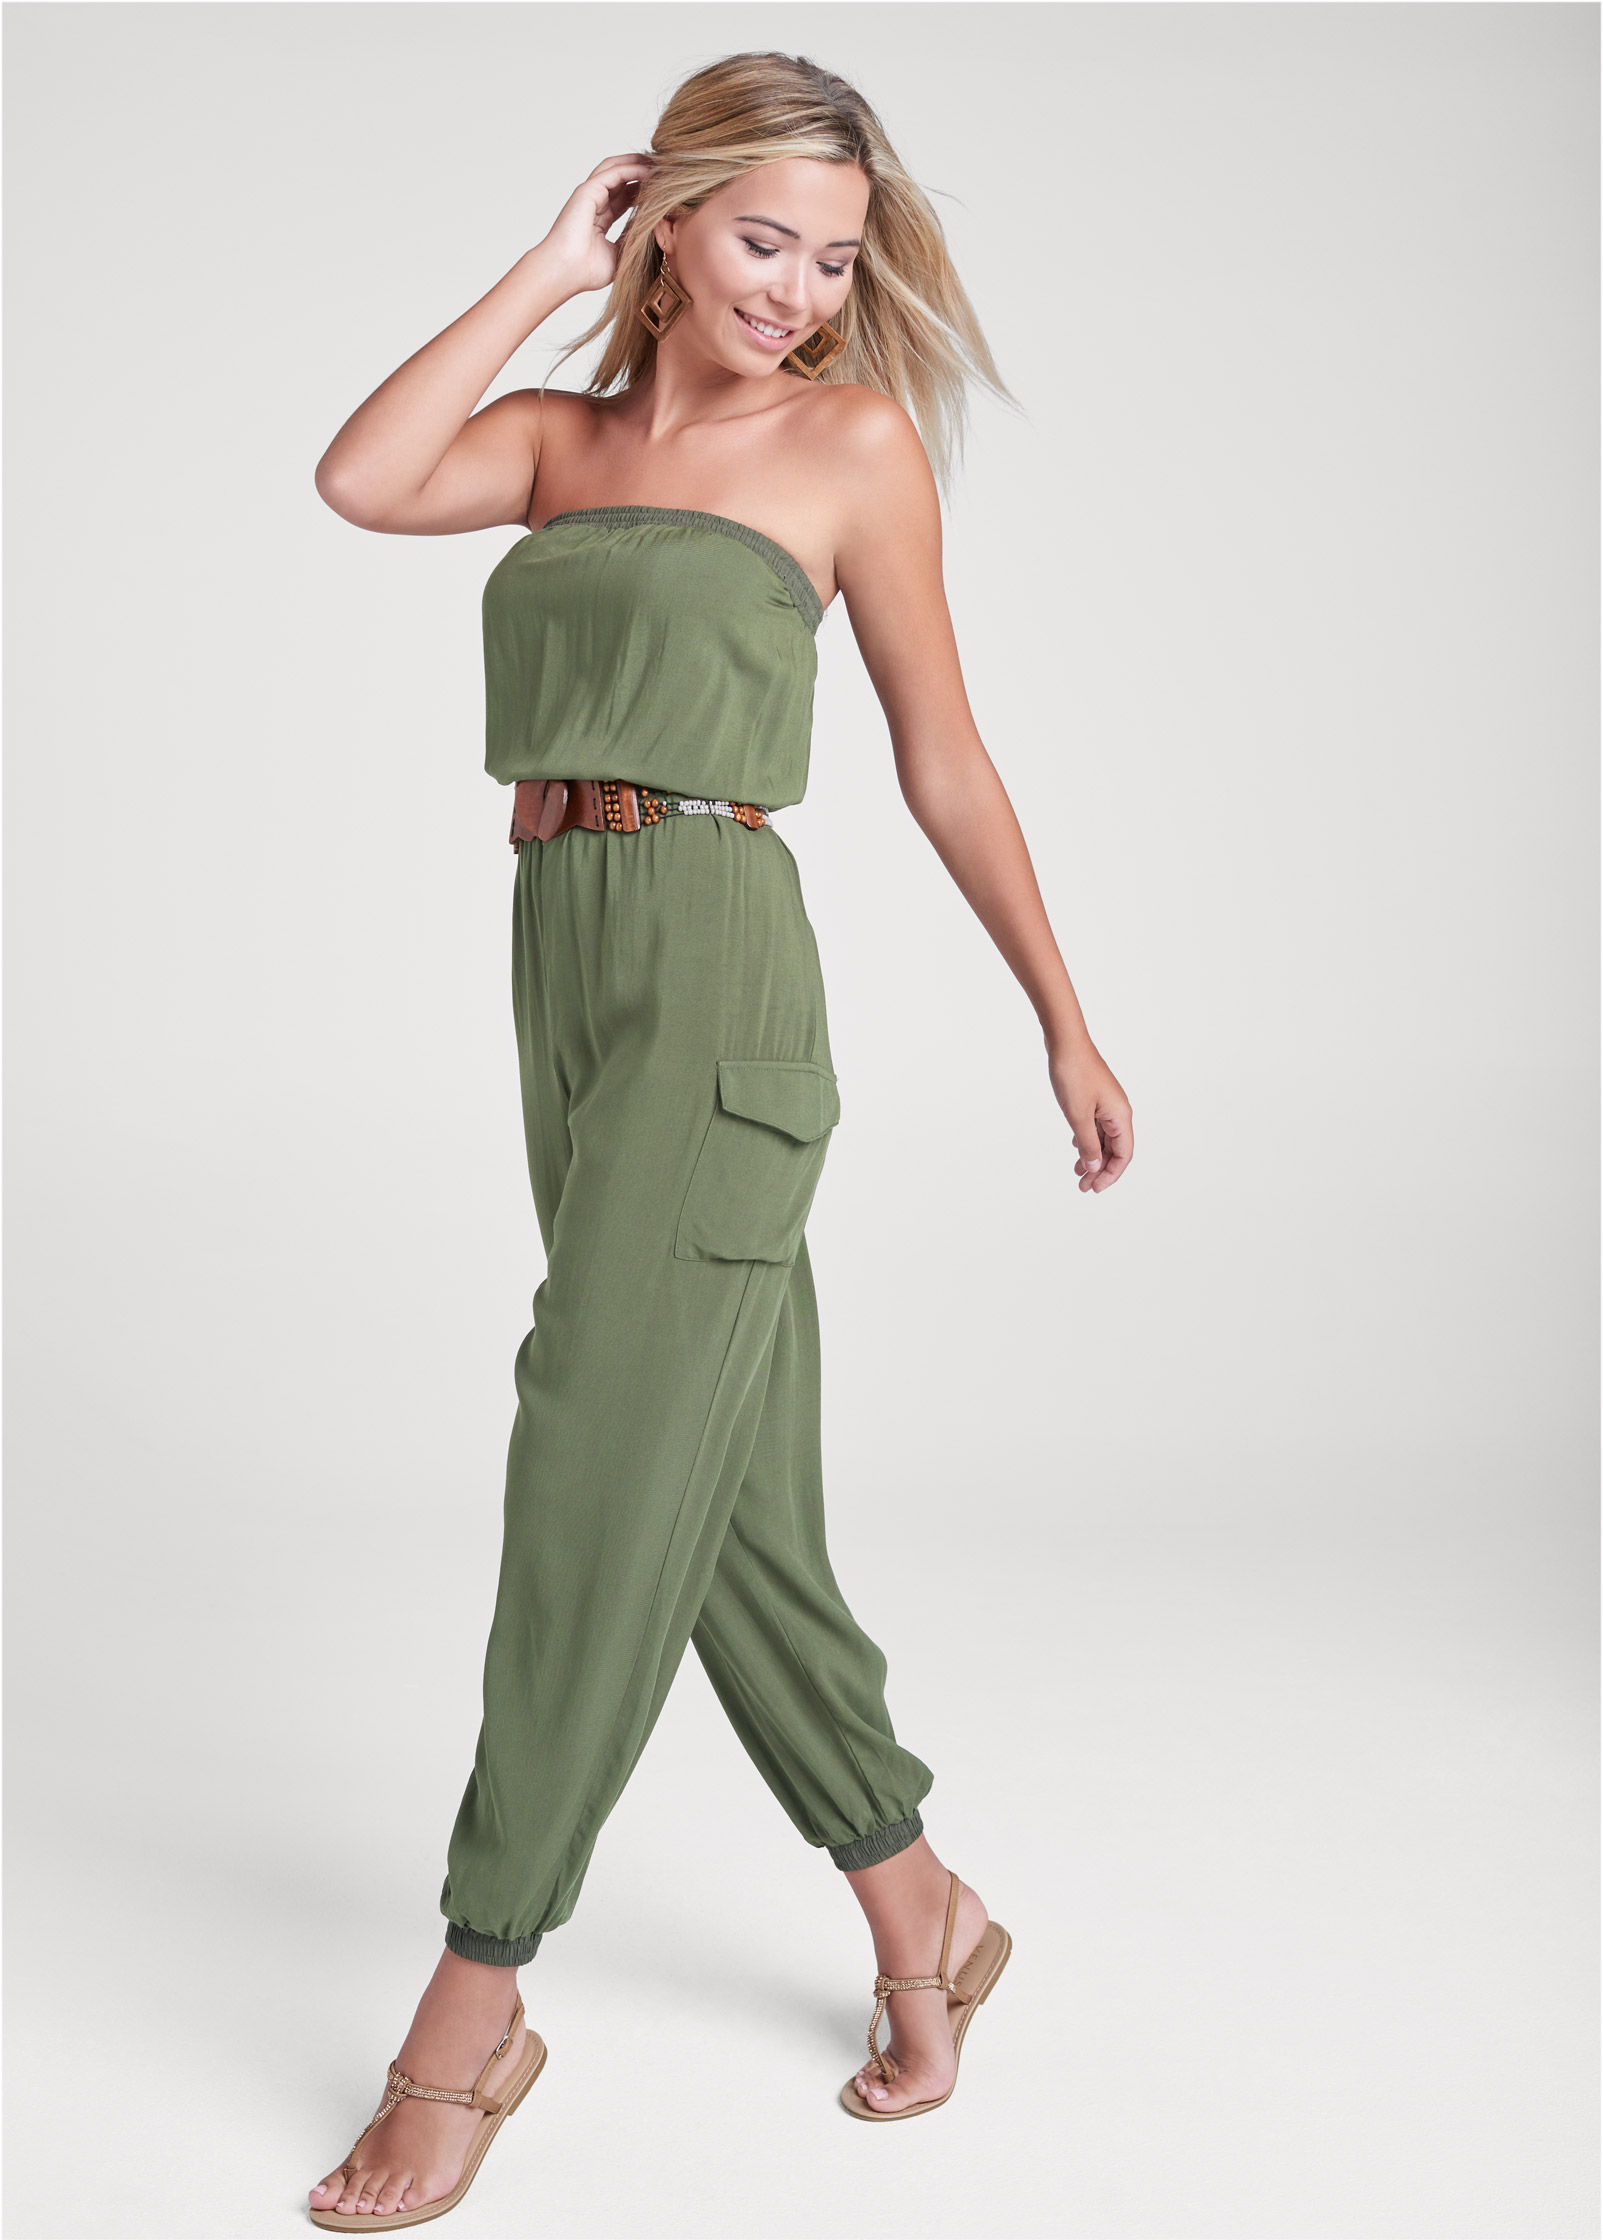 EX HIGH STREET Strappy Detailed Wide Leg Jumpsuit Sizes 8,10,12 14,16,18 